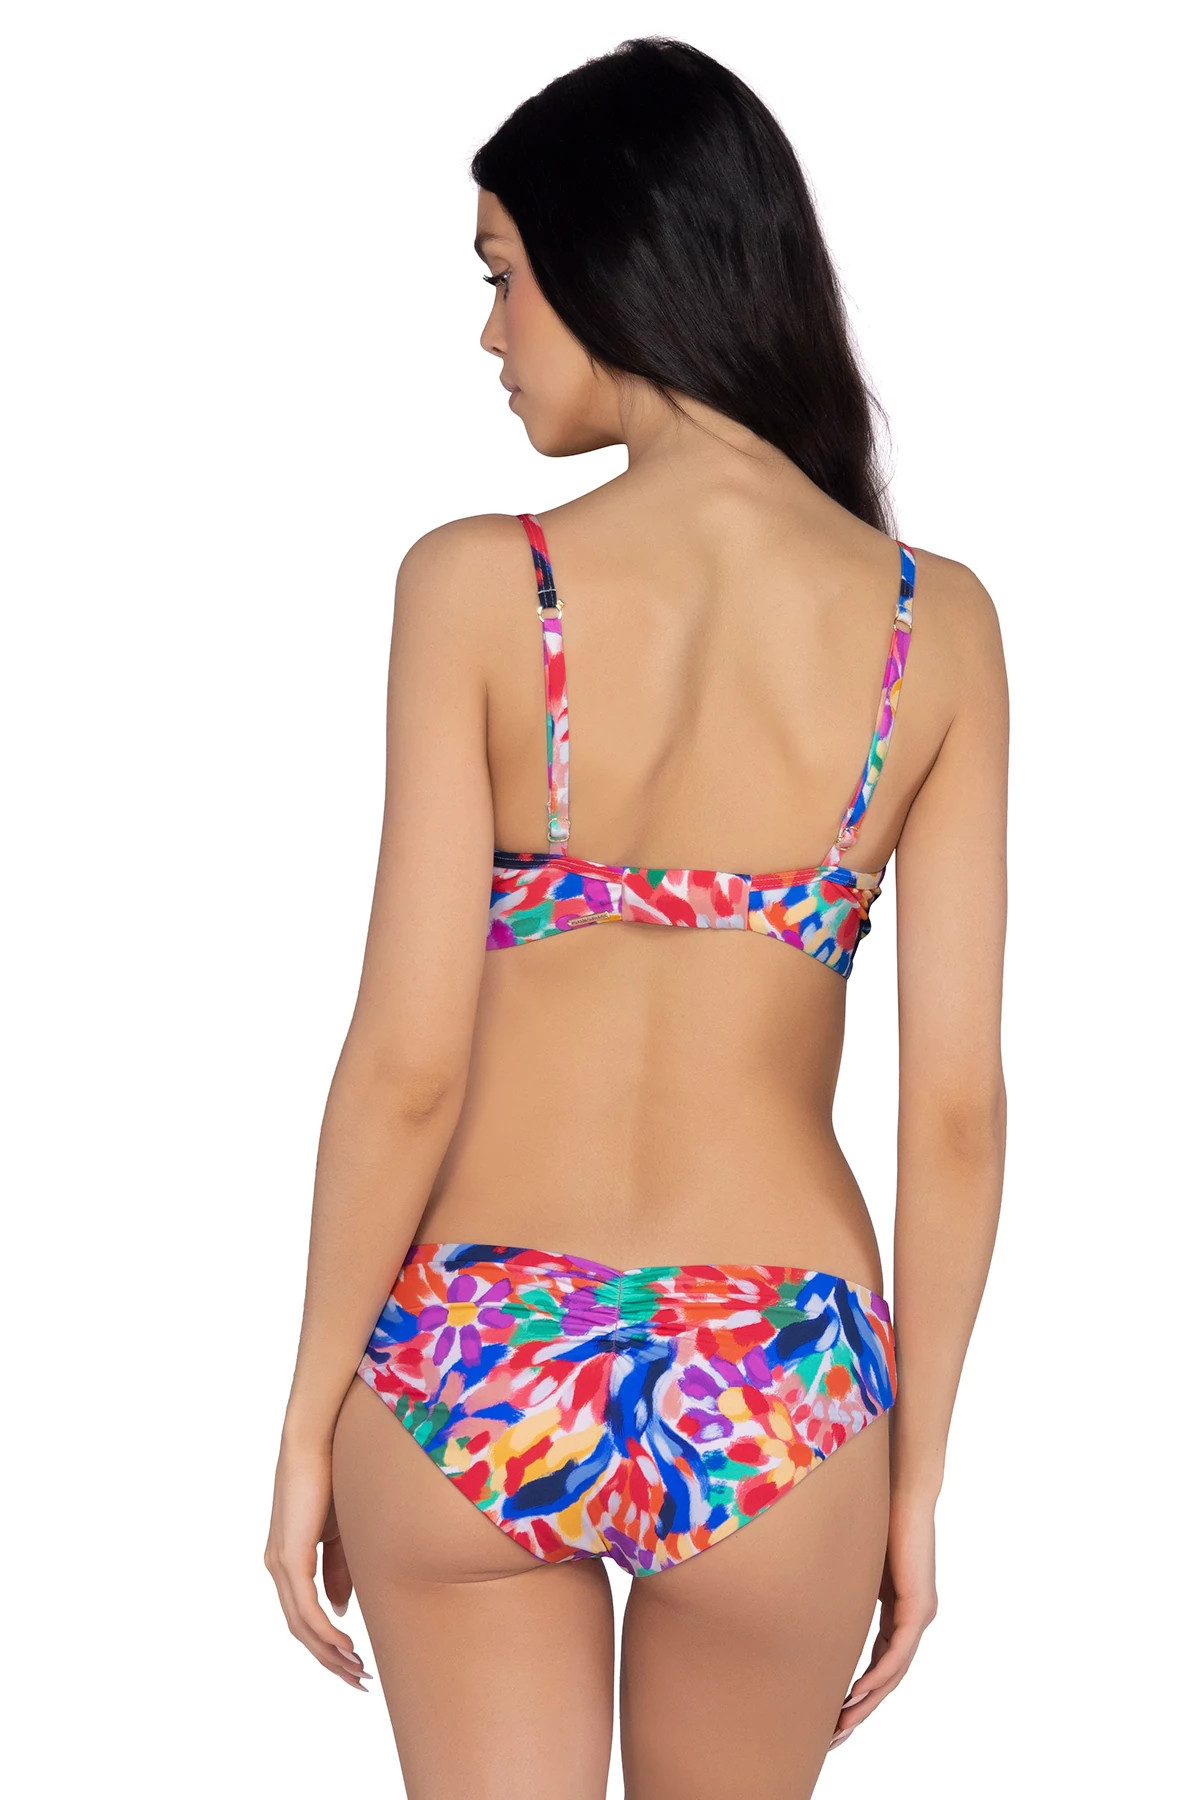 LIVING COLOR Crossroads Underwire Bikini Top (D+ Cup) image number 2